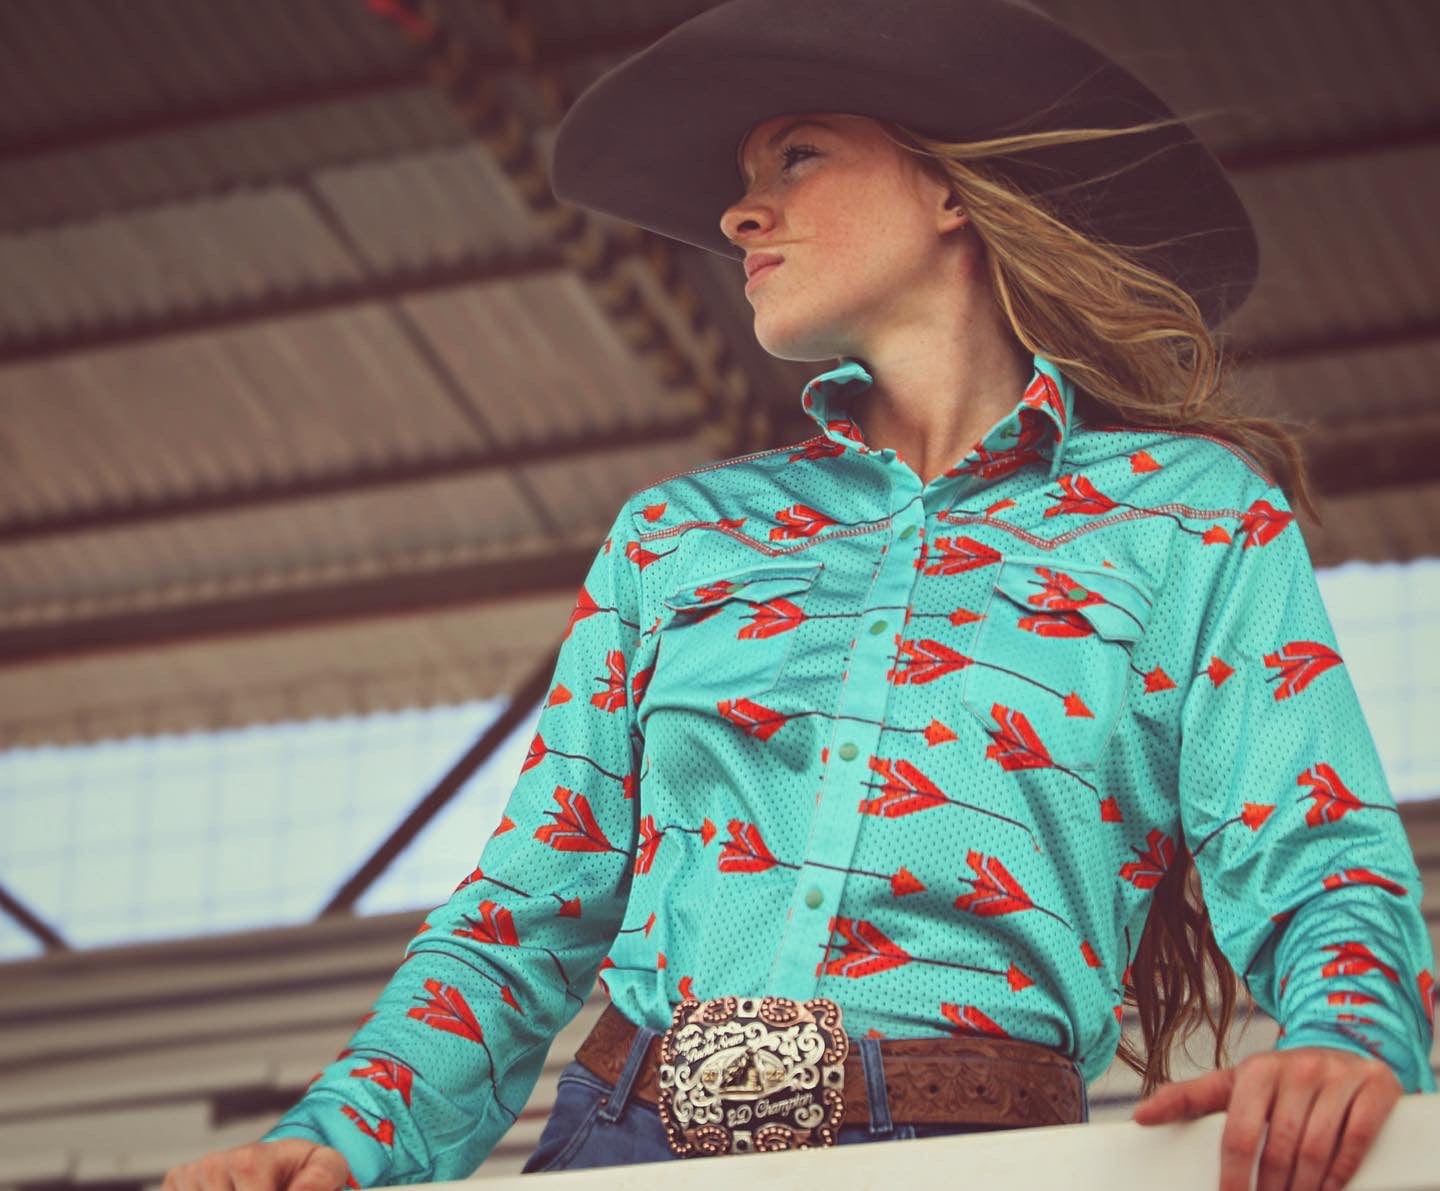 Lacy Boots Shirts Cool Cowgirl® Perforated Cooling Shirts! The Makayla Arrows